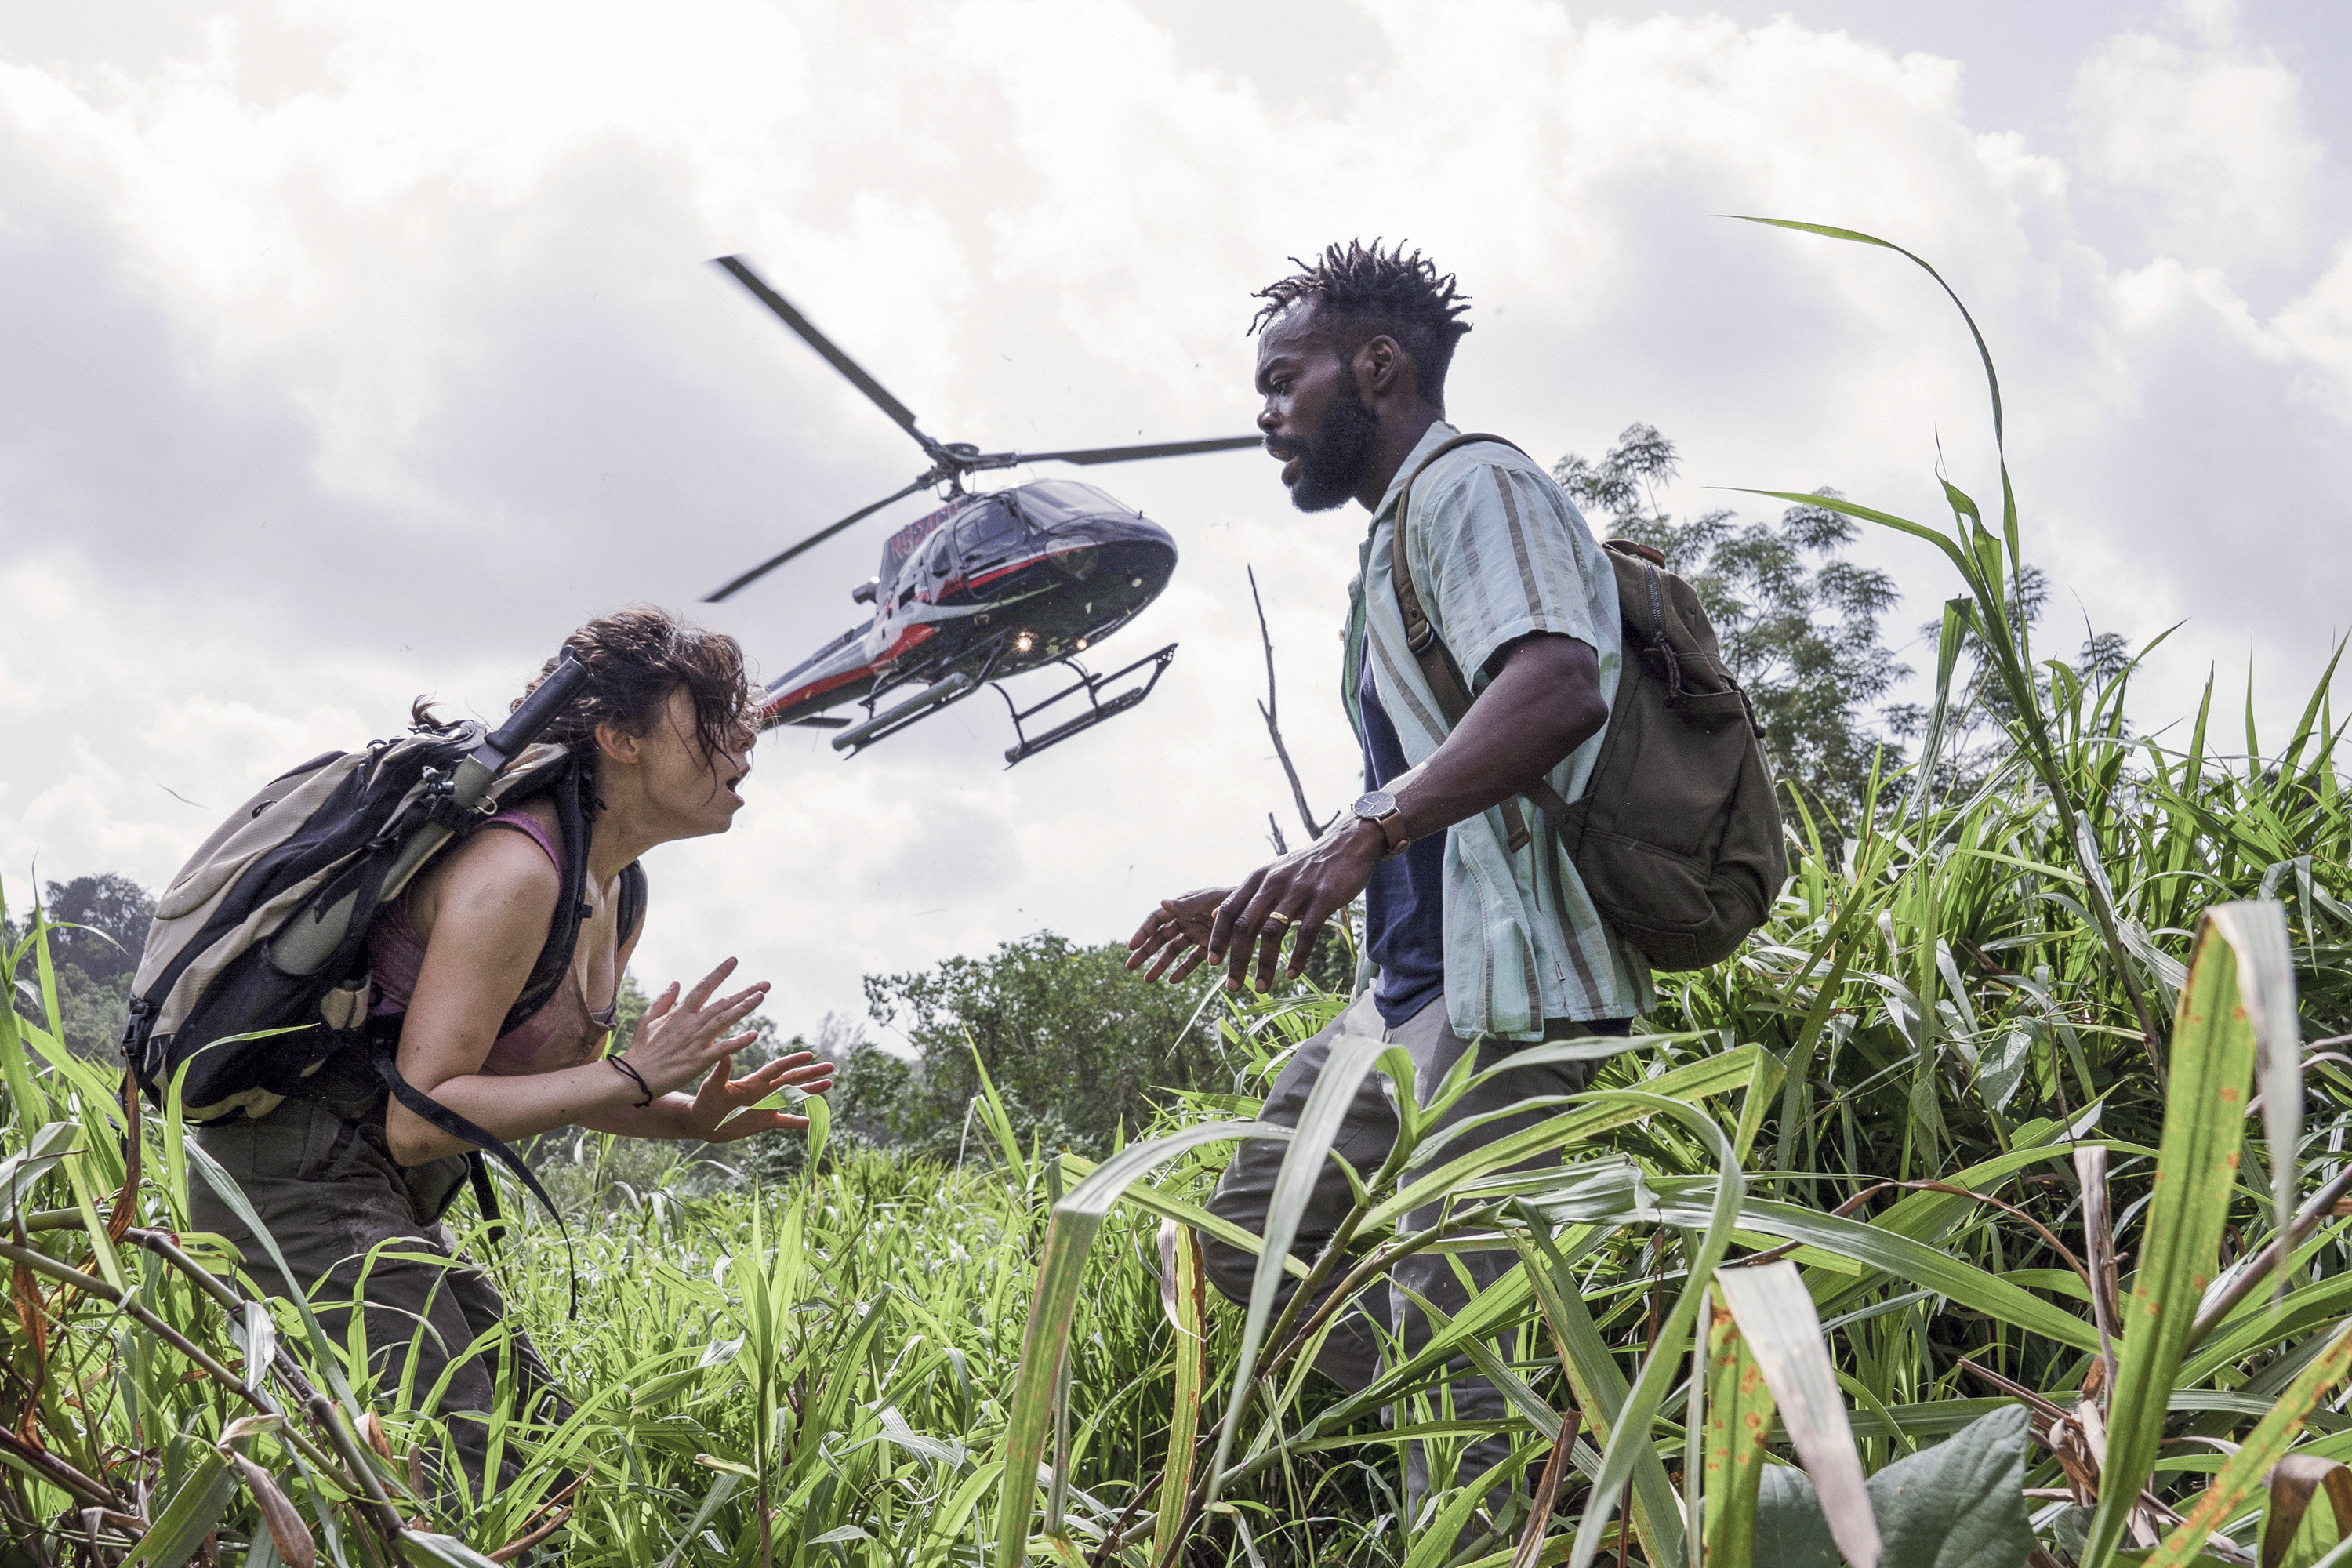 William Jackson Harper and Cristin Milioti stand outside in tall grass. There is a helicopter in the background in The Resort.